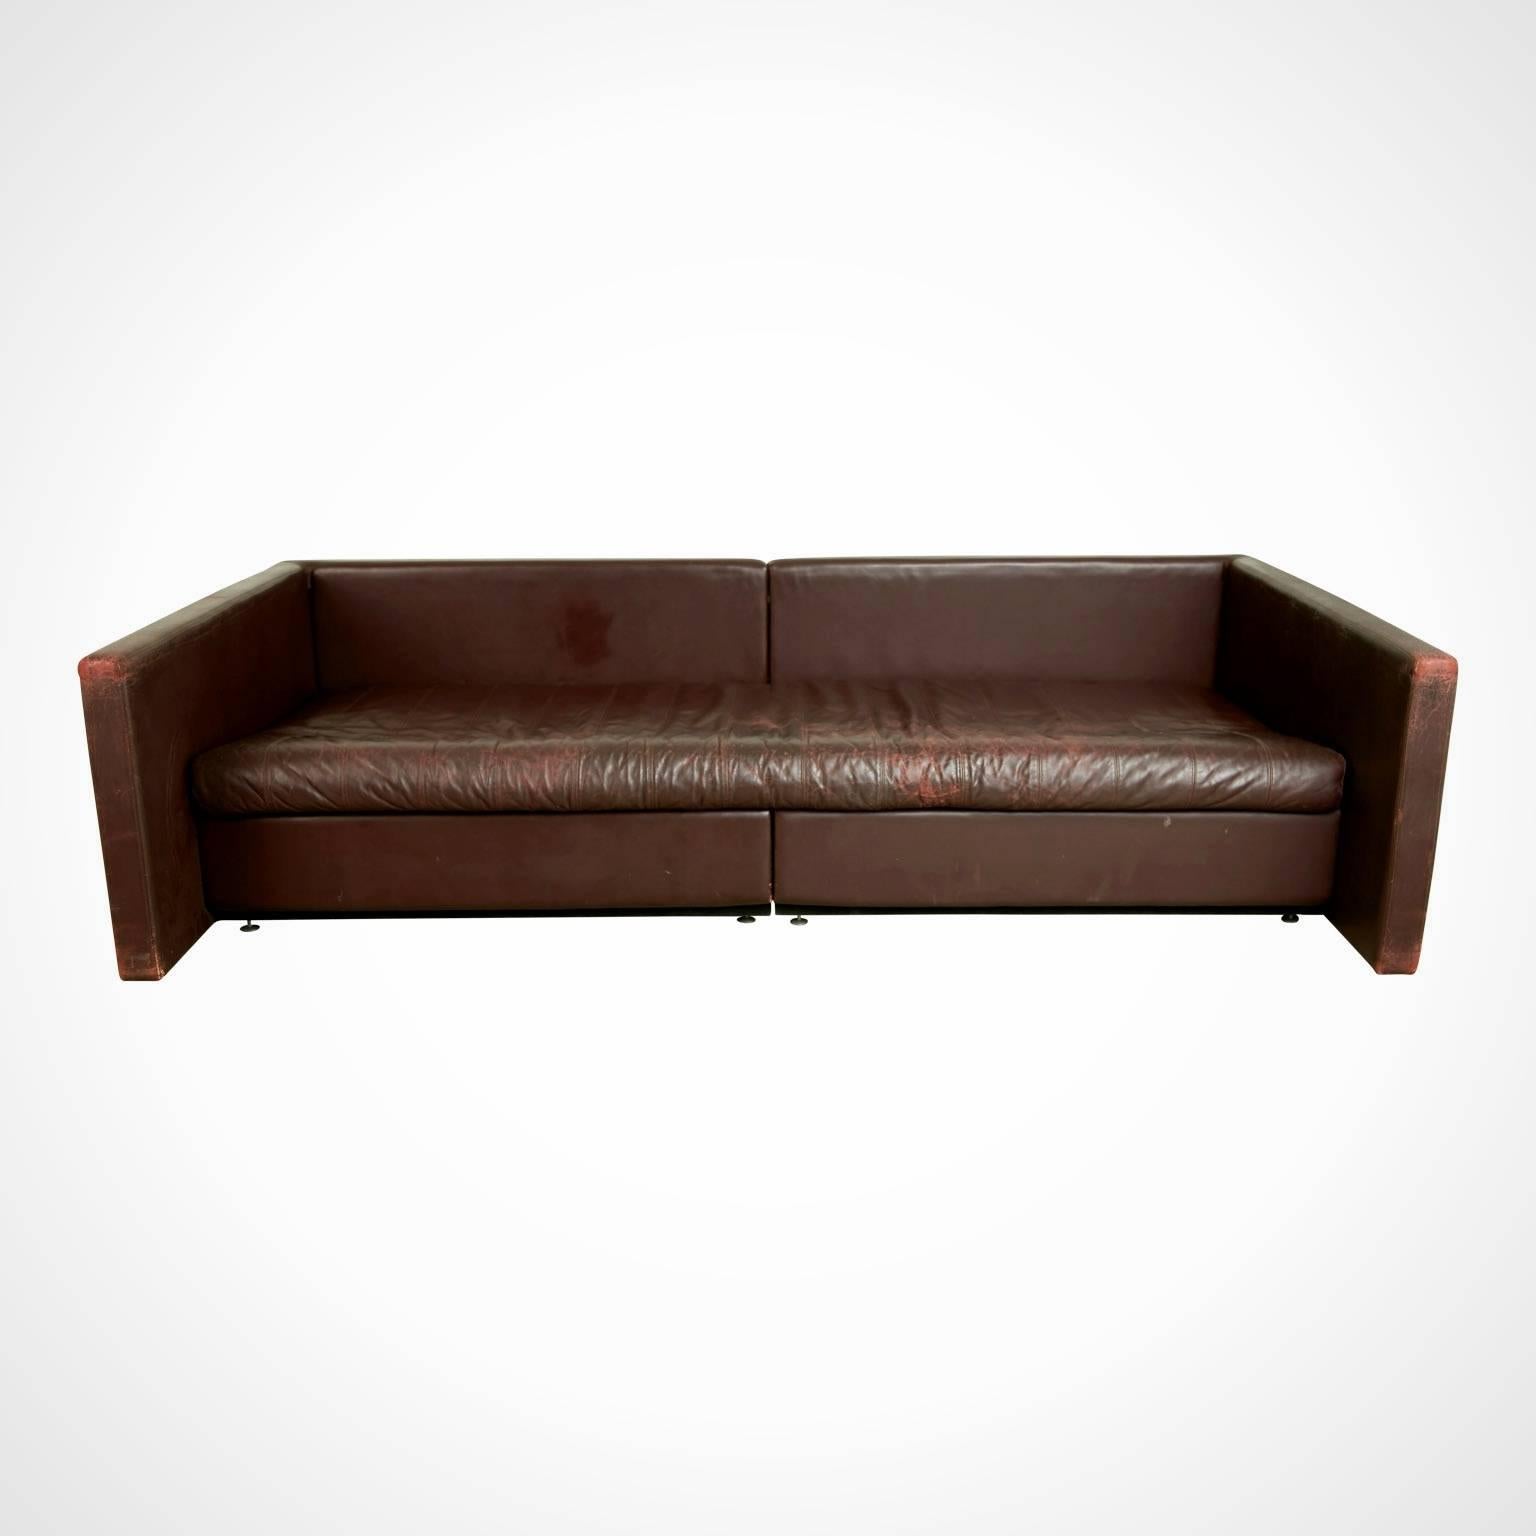 Modern Architectural Leather Sofa by Joseph D'Urso for Knoll International, circa 1980